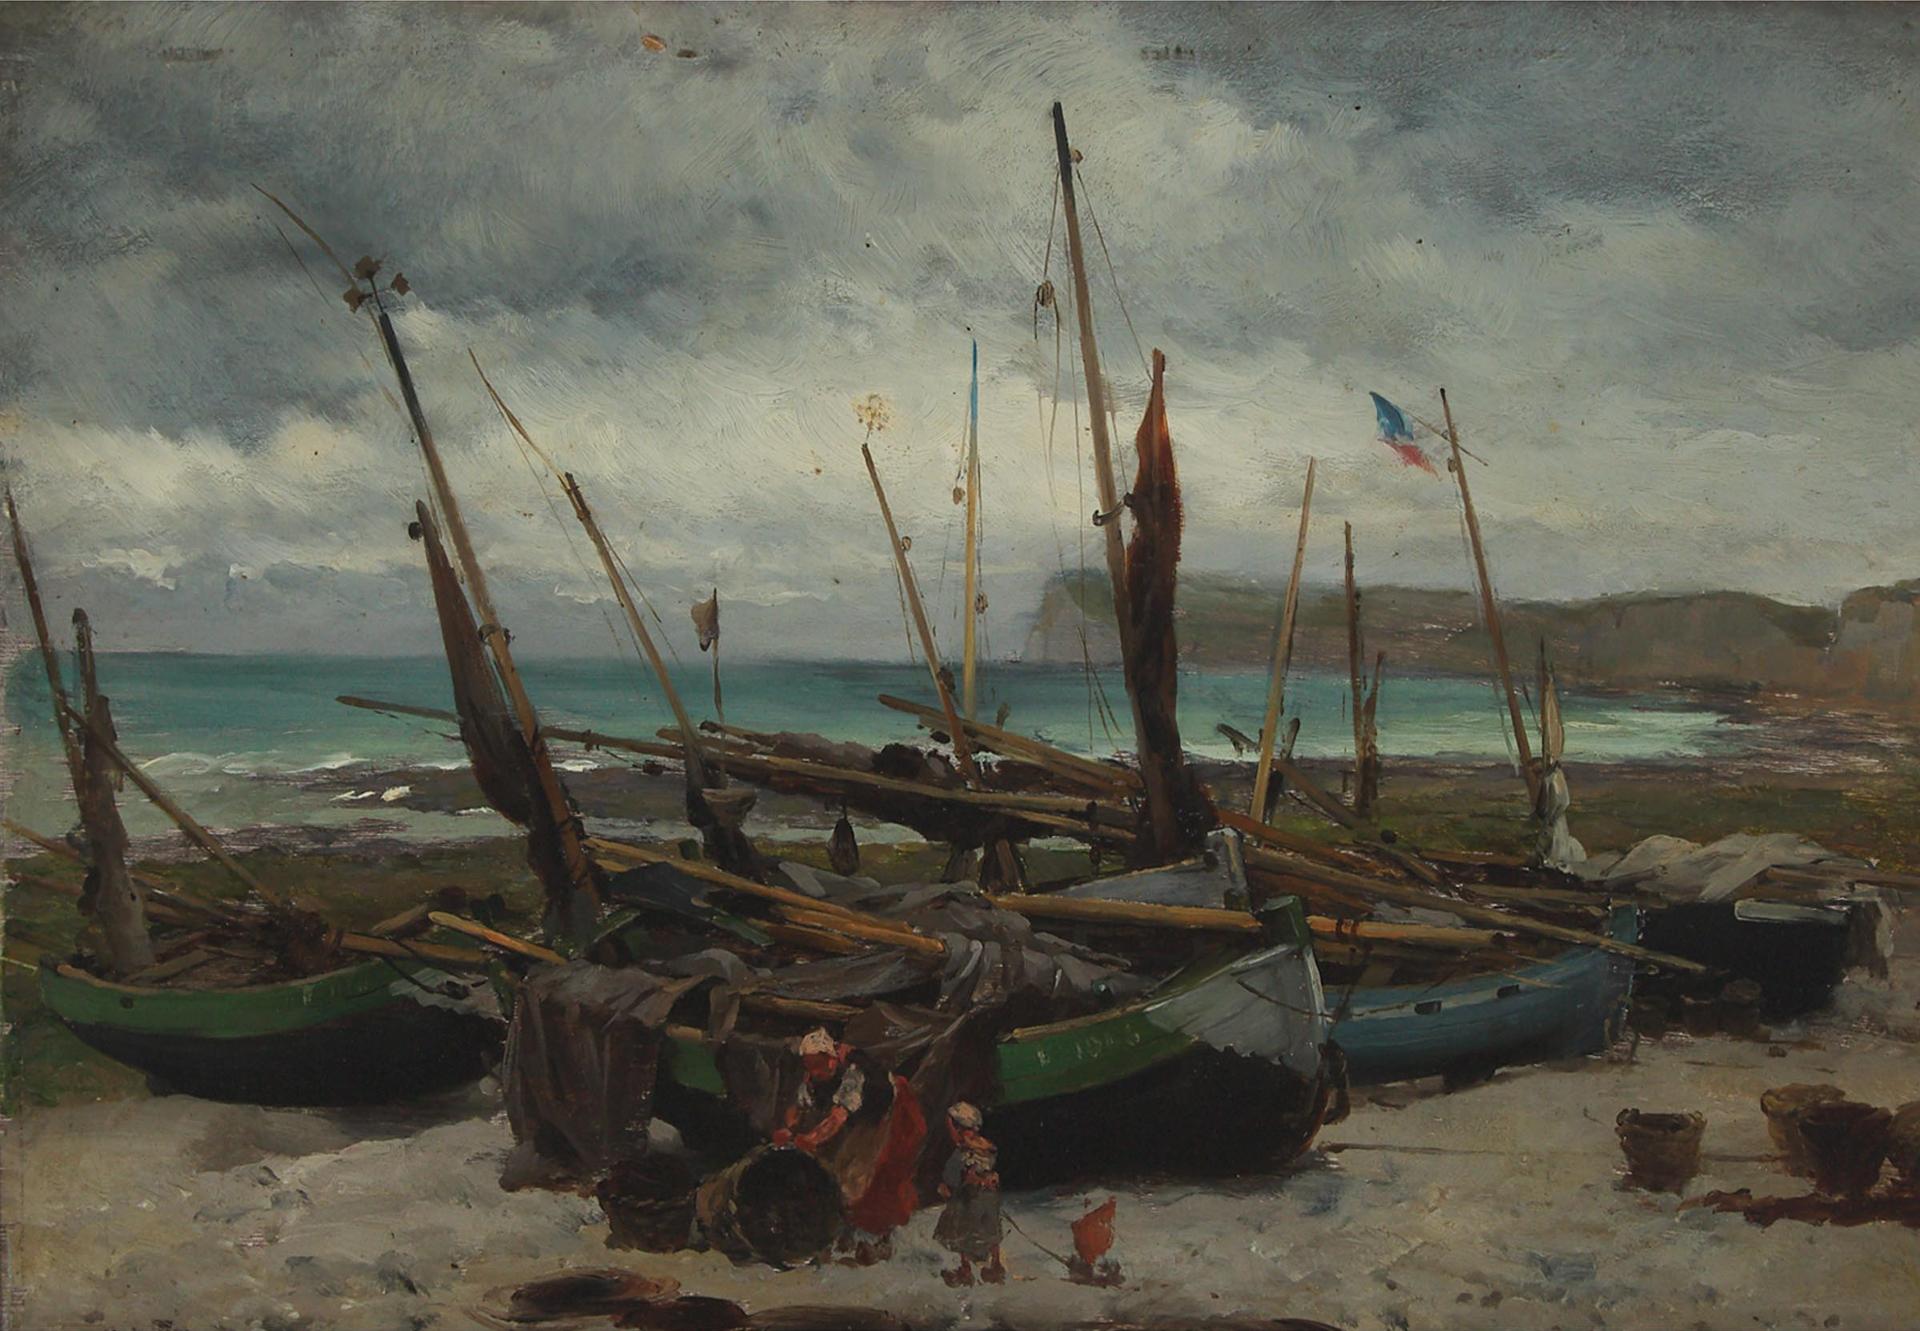 Pierre Outin (1840-1899) - Le Treport (A Small Fishing Port And Light Industrial Town Situated In The Pays De Caux, 21 Miles (34 Km) Northeast Of Dieppe)